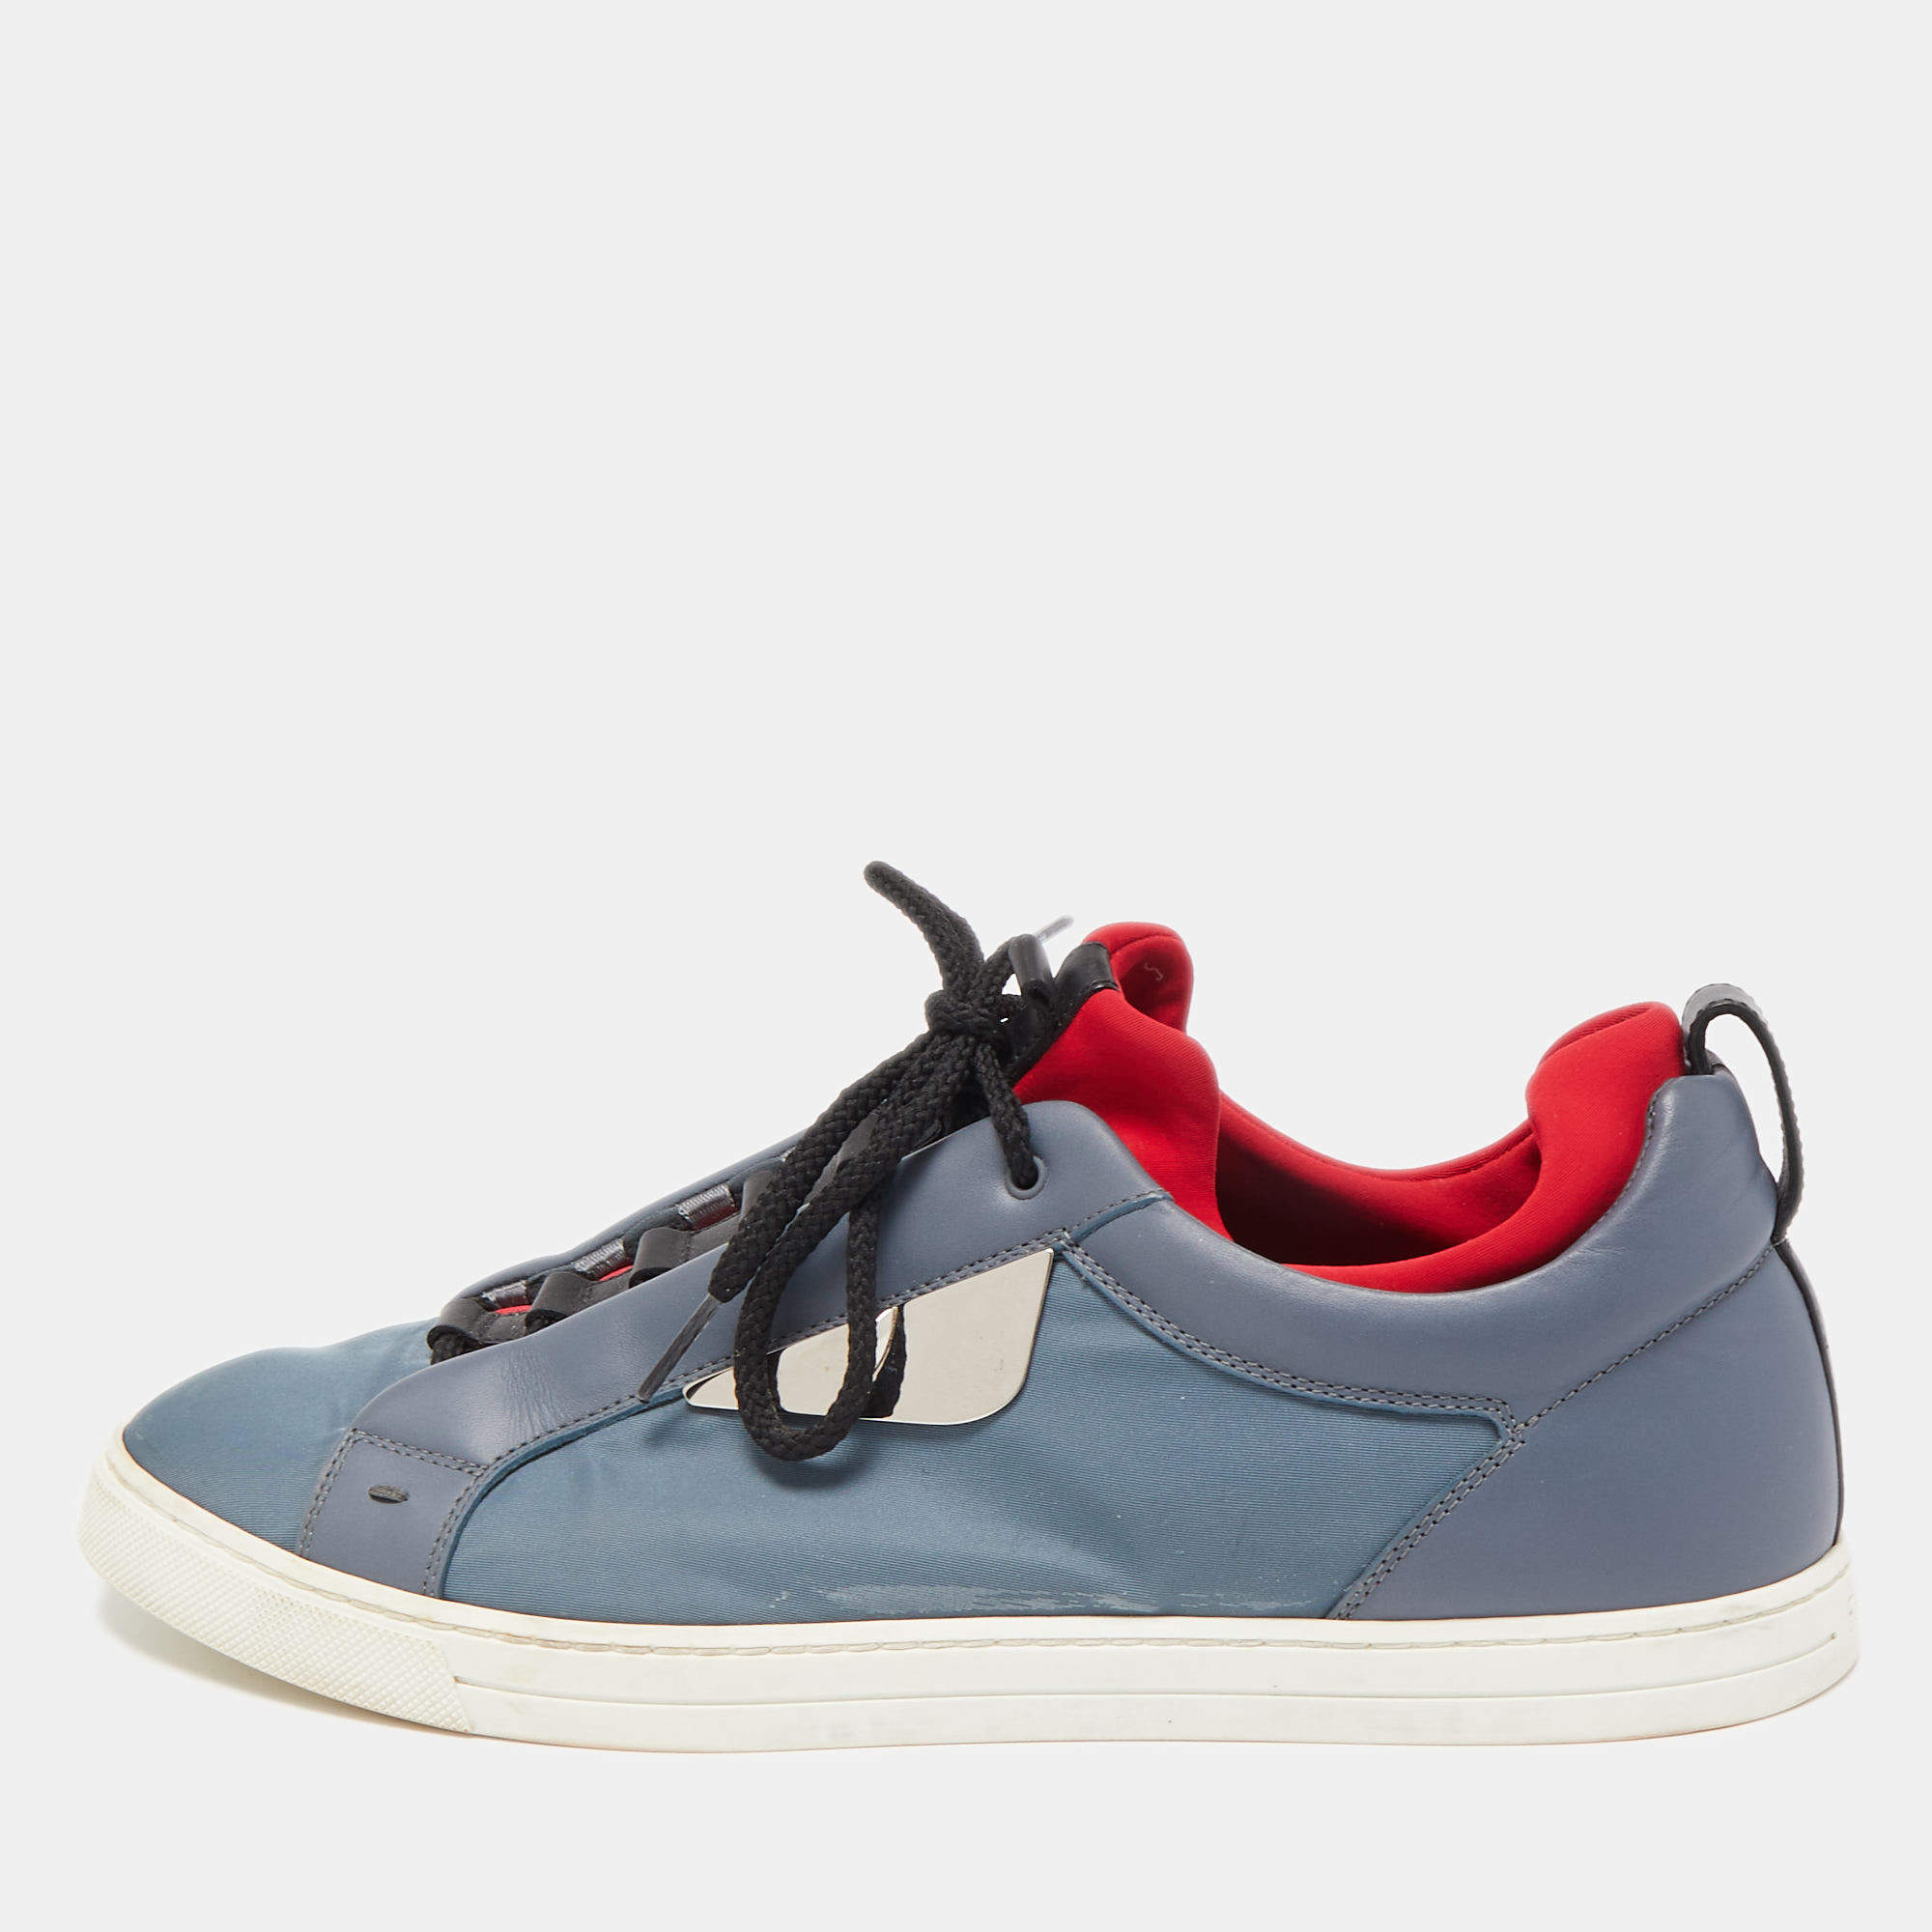 Fendi Embroidered Colorblock Sneakers In Blk/blue | ModeSens | Fendi shoes,  Mens casual shoes, Sneakers men fashion